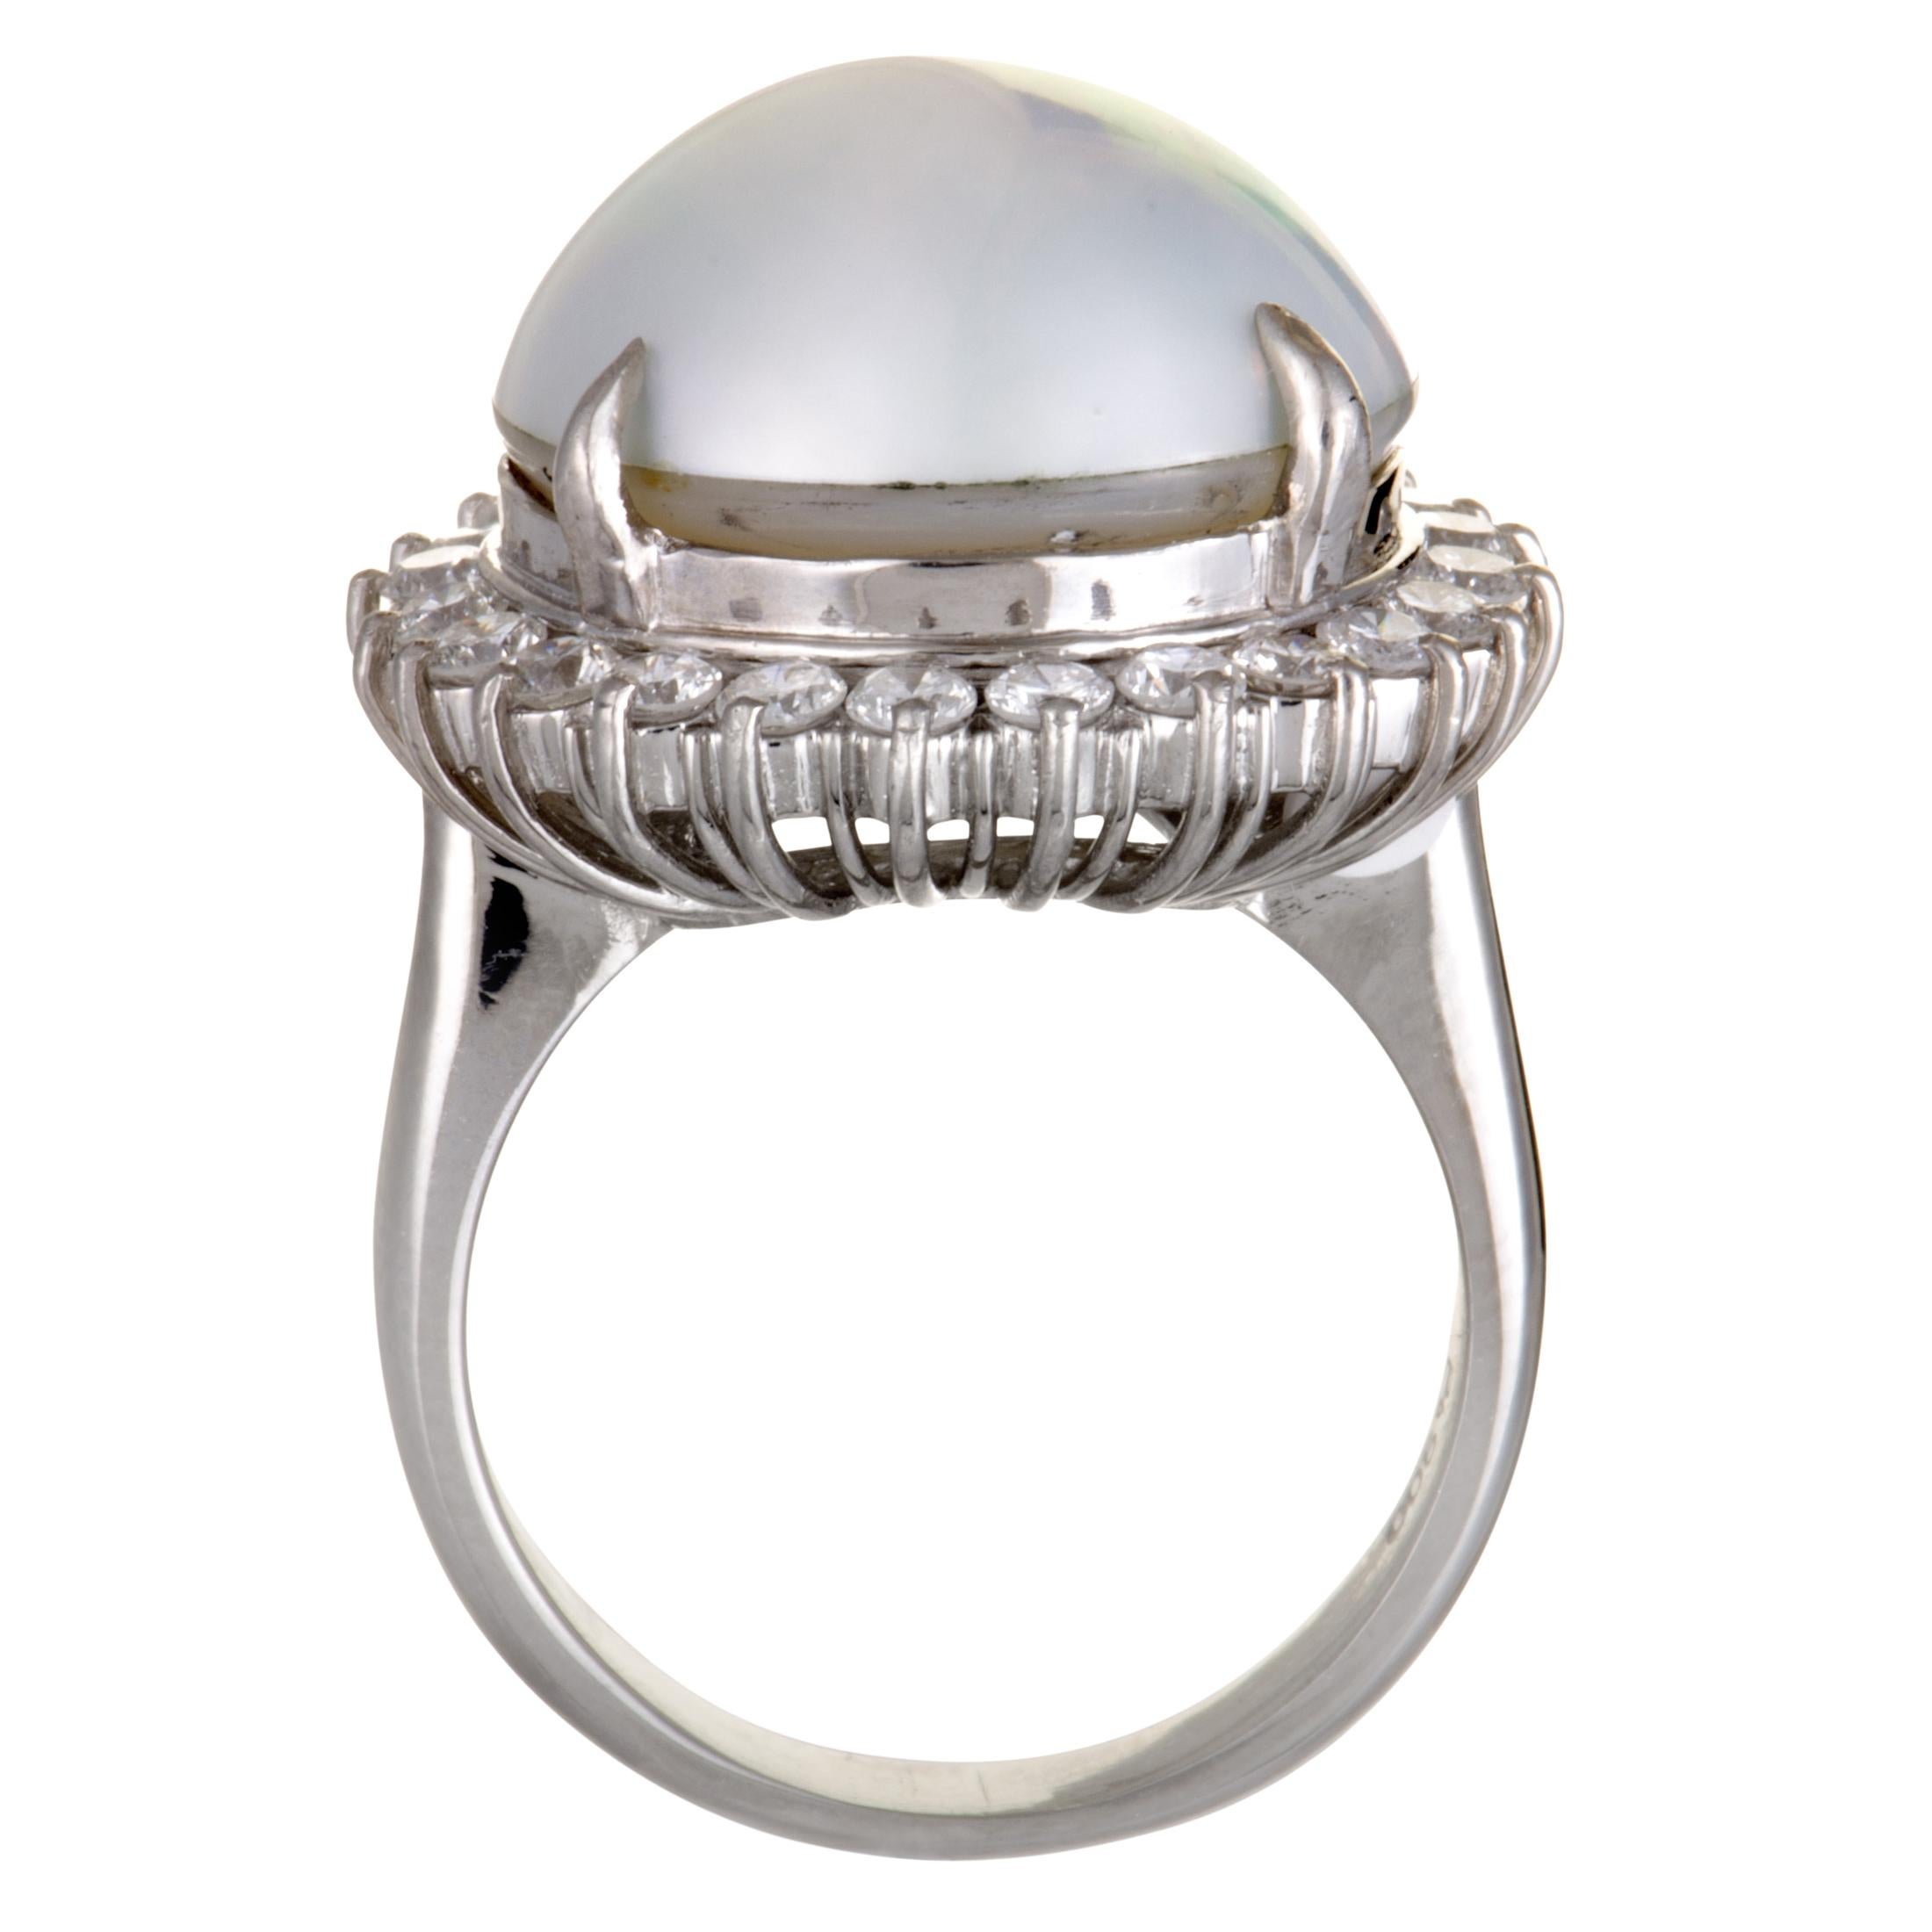 Framed in a stunningly luxurious fashion by gorgeously scintillating diamond stones, the sublime allure of the exceptional mabe pearl in this majestic ring is brought to a whole new level. The ring is made of platinum and boasts a total of 1.00